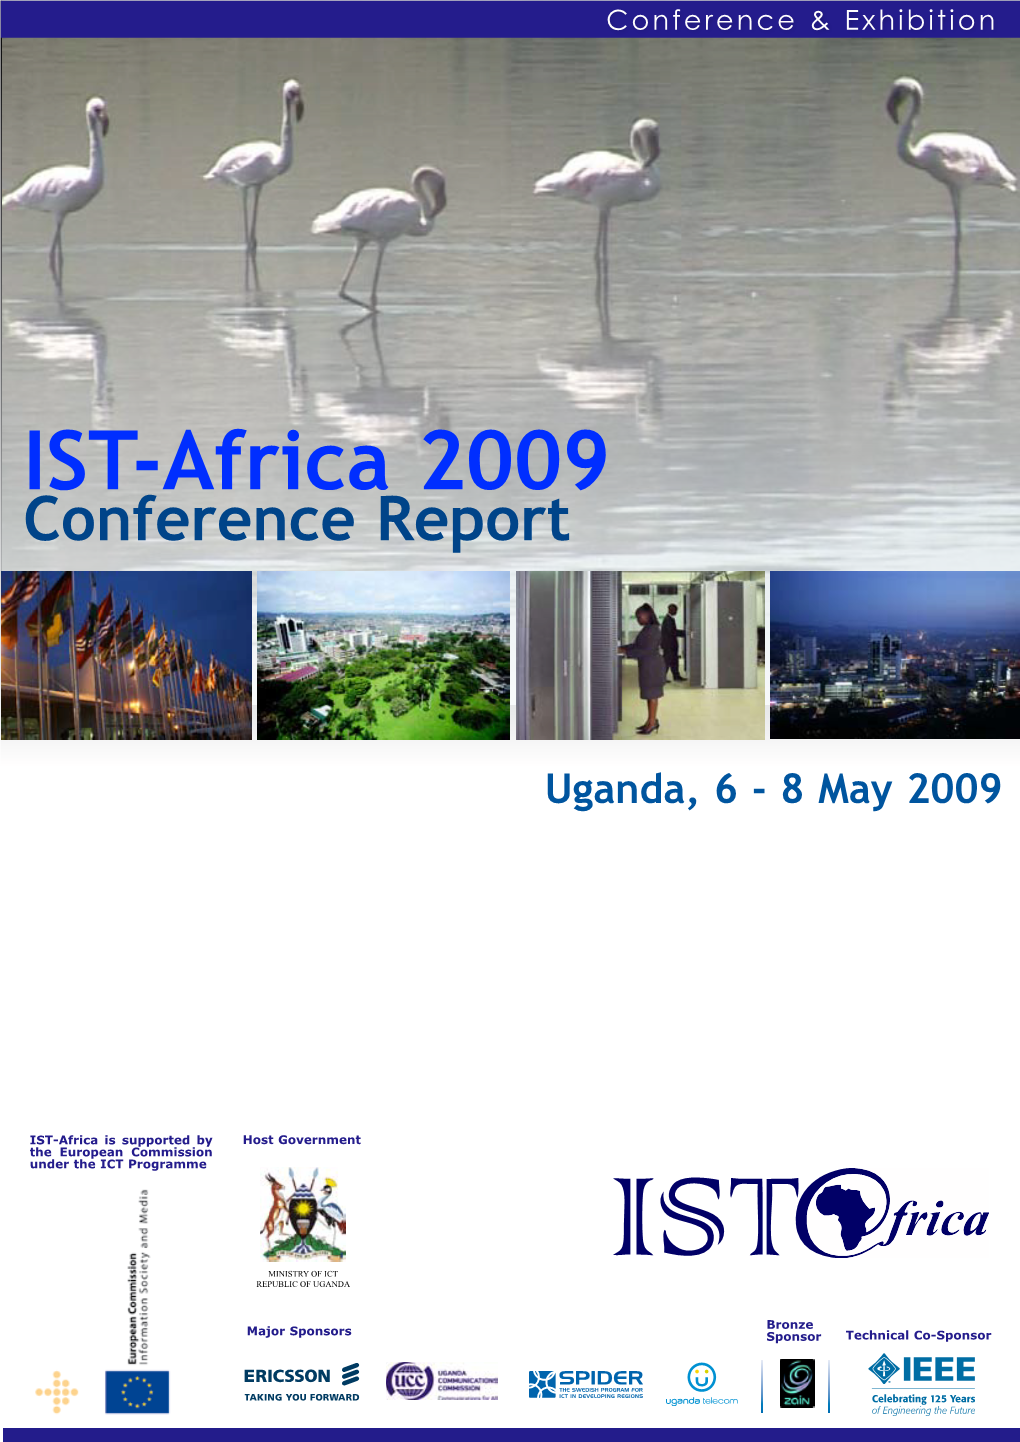 IST-Africa 2009 Conference Report